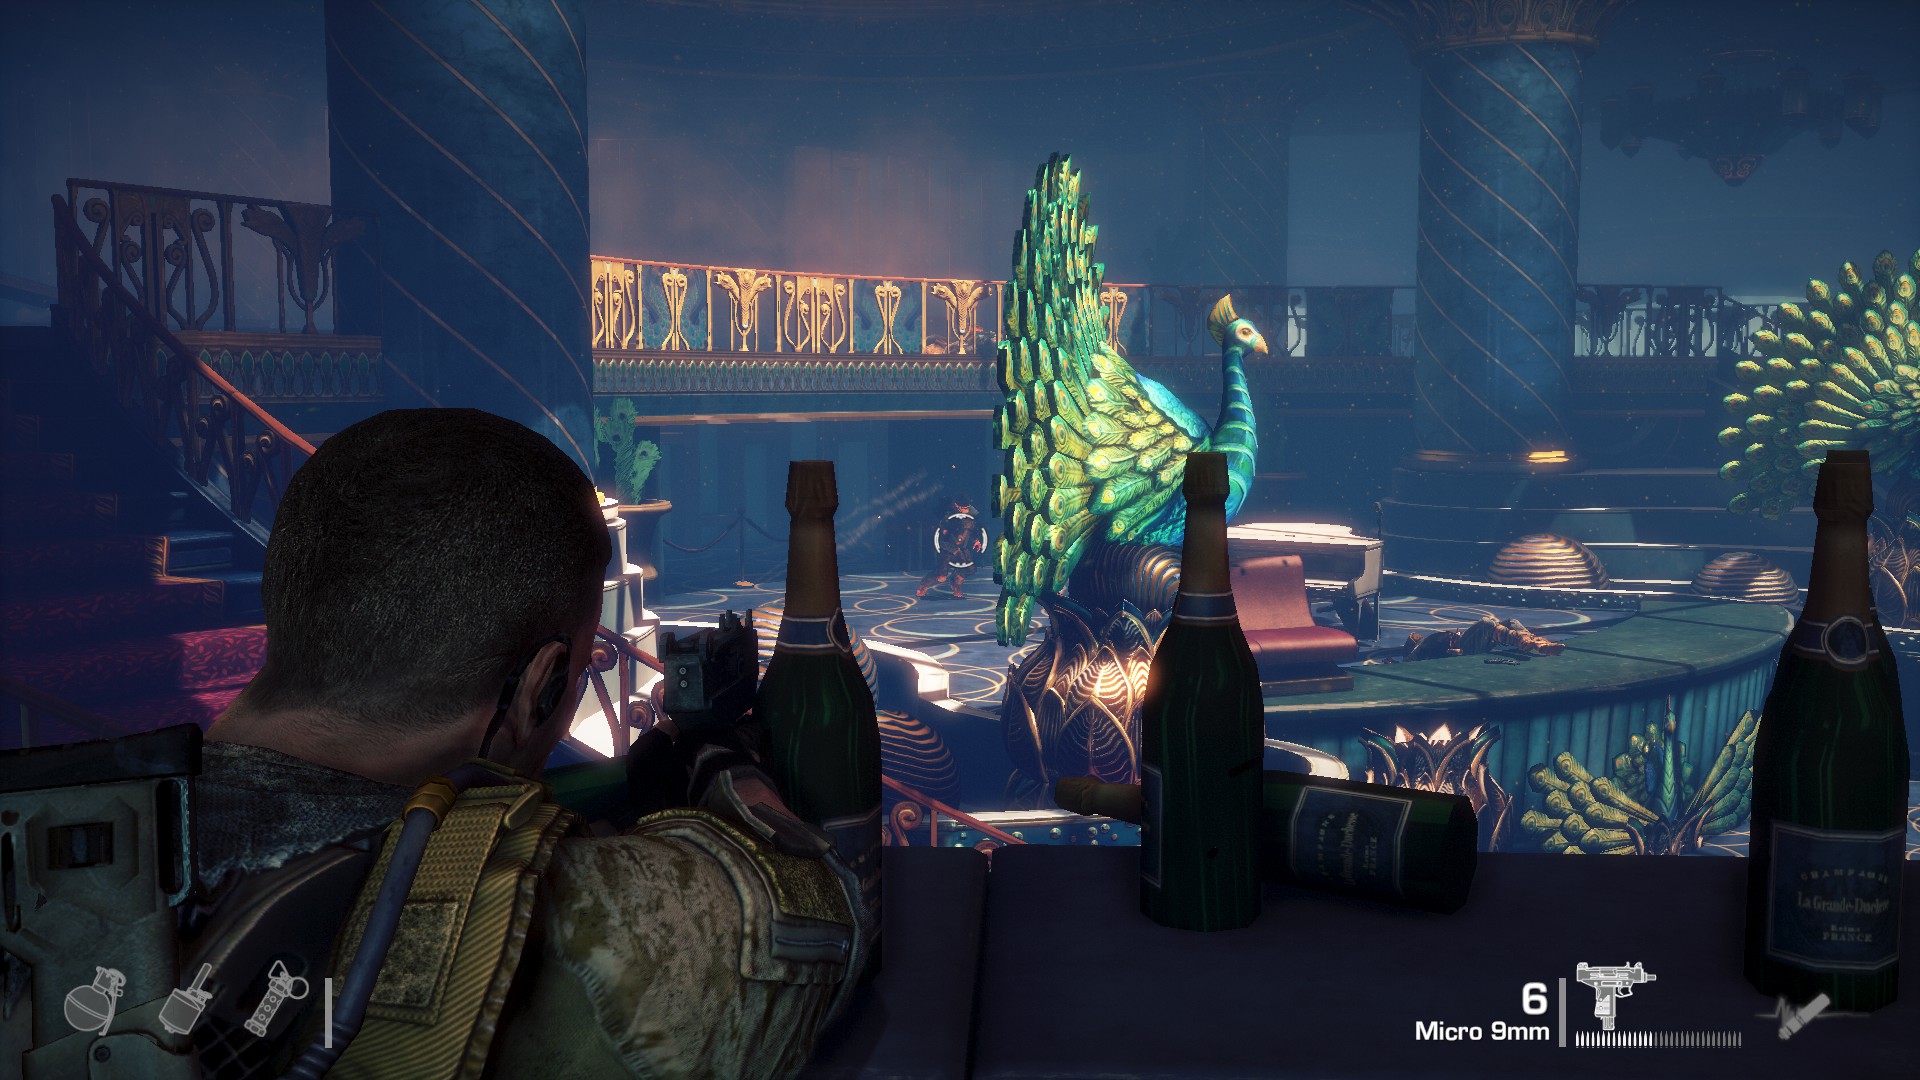 Line gameplay. Spec ops the line 2. Spec ops the line 2 Gameplay. Spec ops the line ps4. Spec ops the line геймплей.